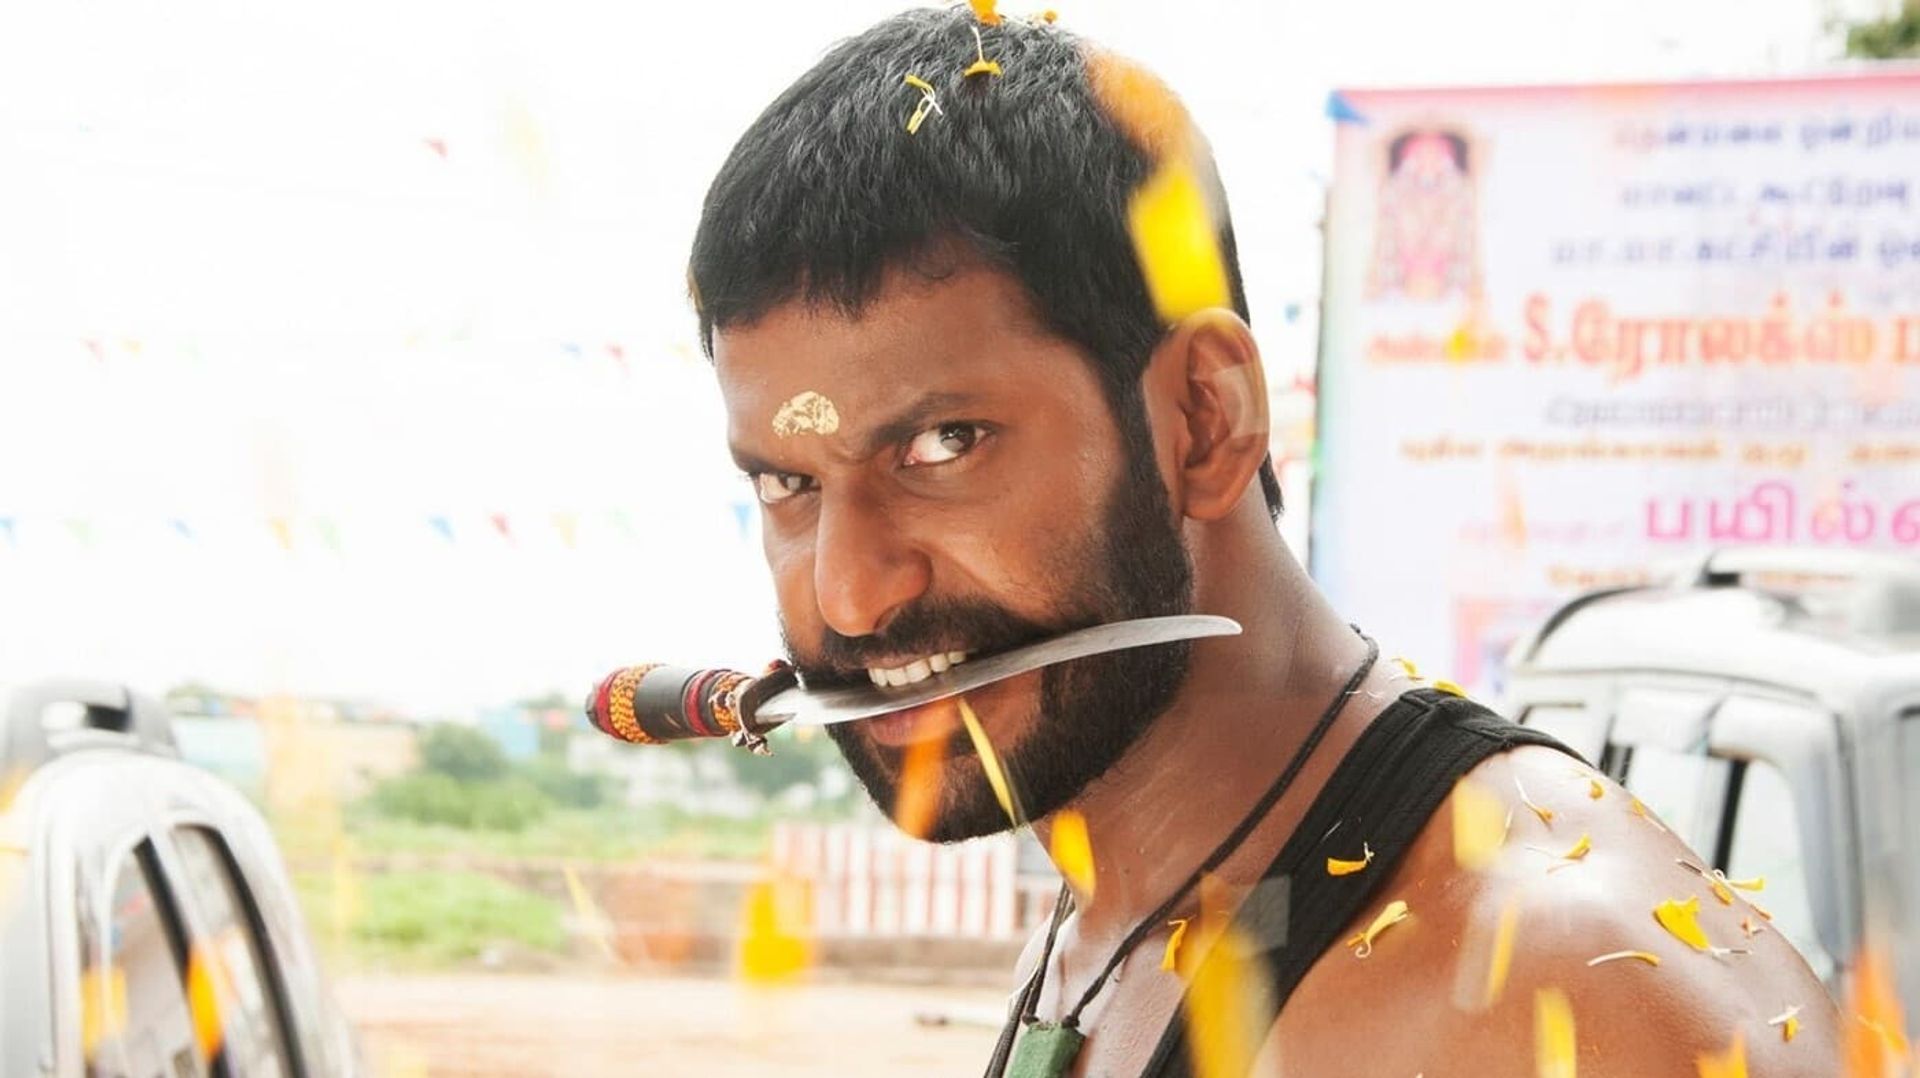 Marudhu teaser: Vishal shines in his tough guy avatar in an otherwise  ordinary teaser! - Bollywood News & Gossip, Movie Reviews, Trailers &  Videos at Bollywoodlife.com